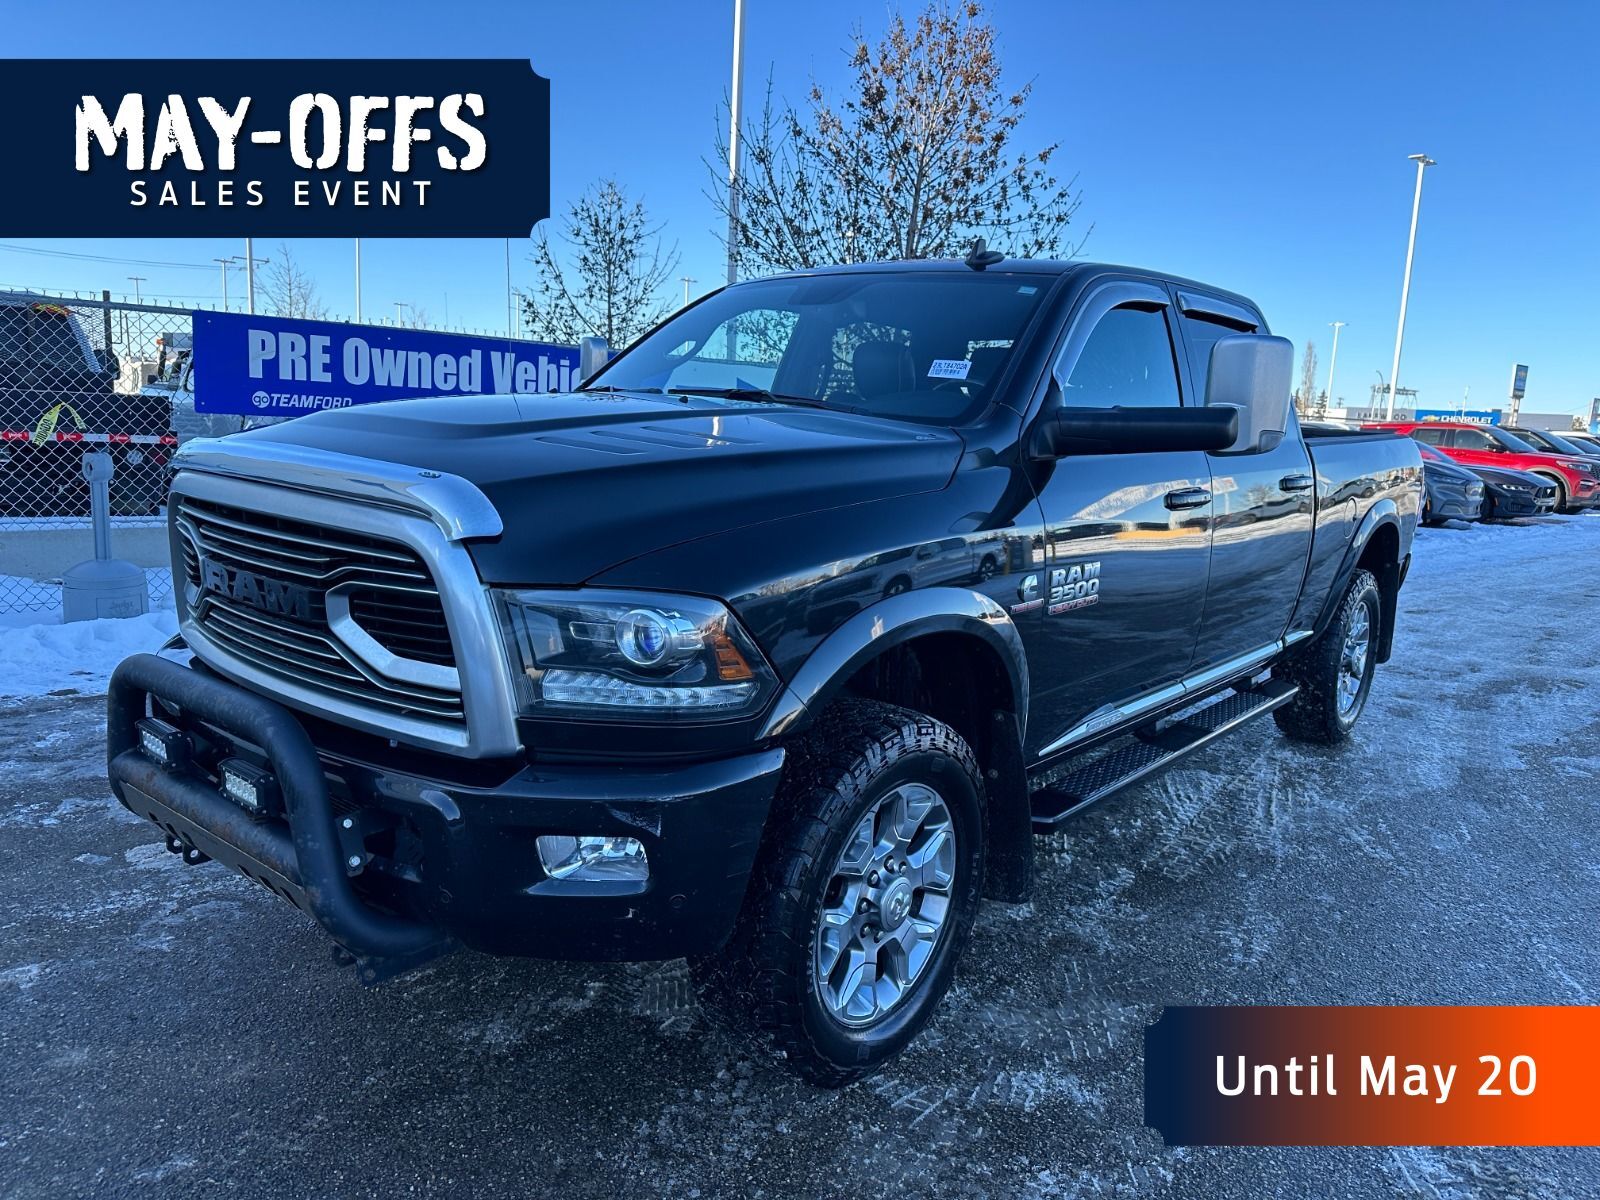 2018 Ram 3500 LIMITED TUNGSTEN EDITION - HEATED AND COOLED SEATS